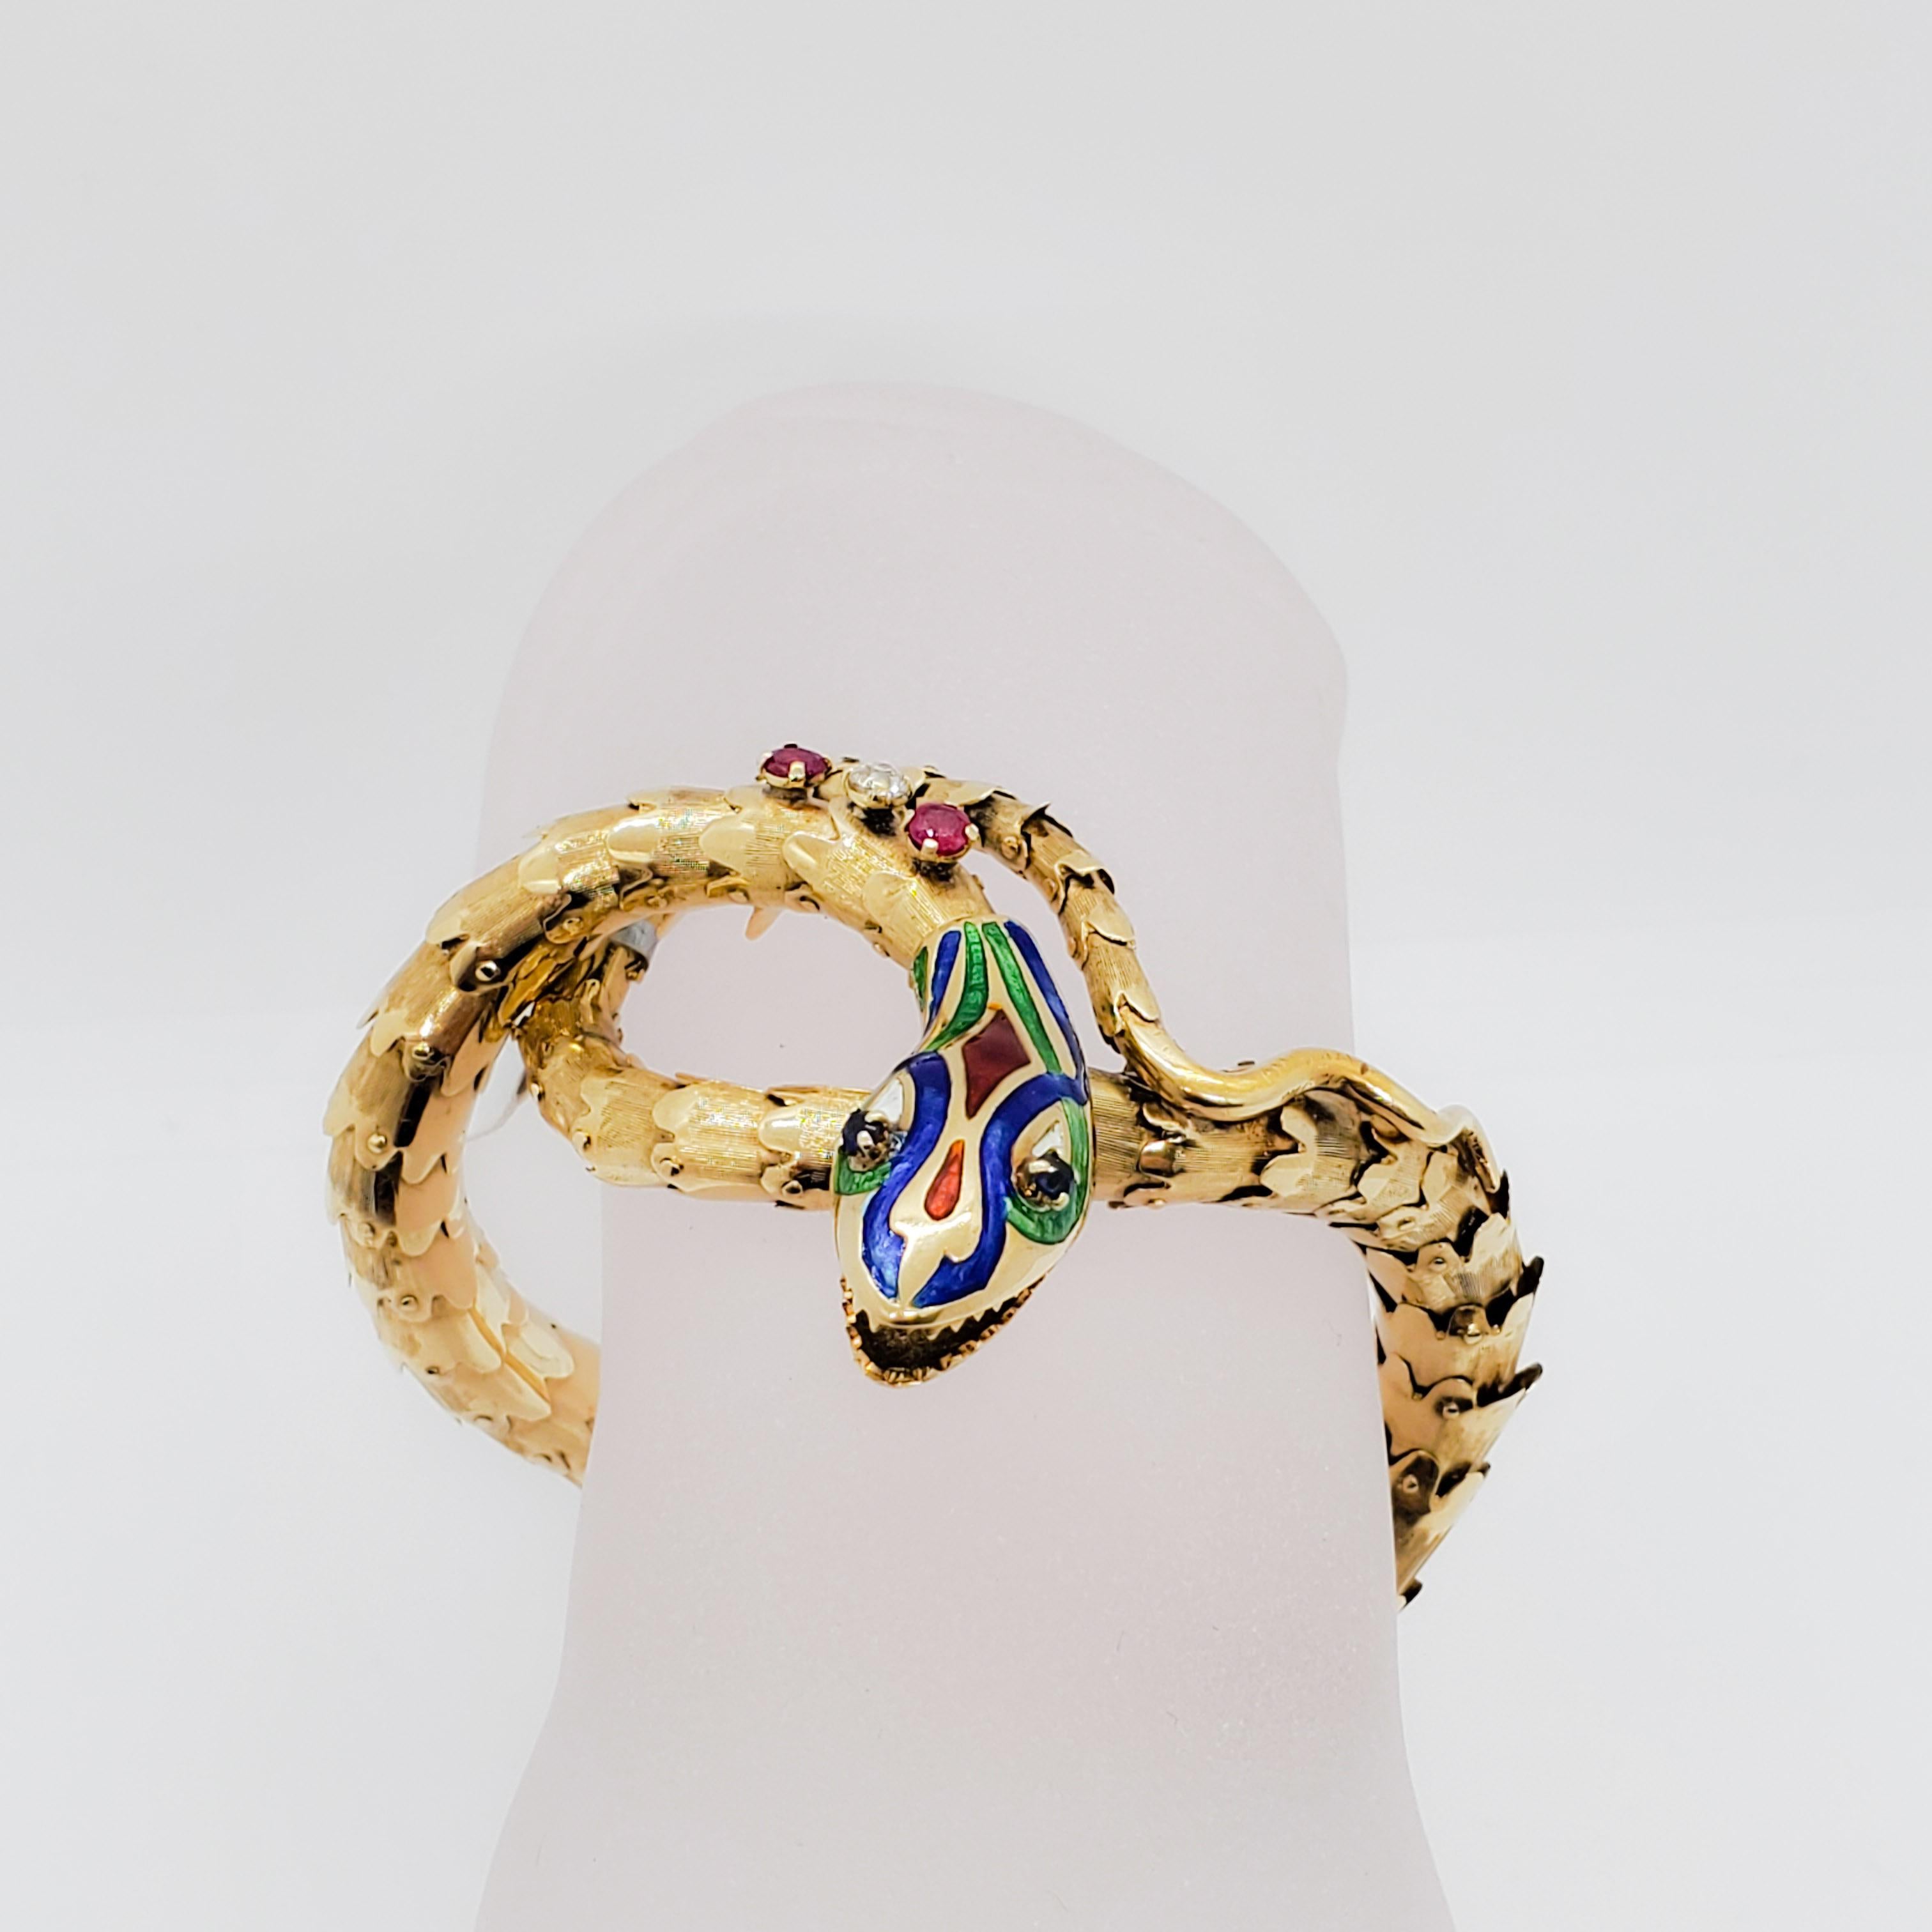 Beautiful bracelet showcasing red, blue, and green enamel on 14k yellow gold.  Good quality diamonds weigh 0.15 ct.  This item has been made very well with attention to detail and flexibility.